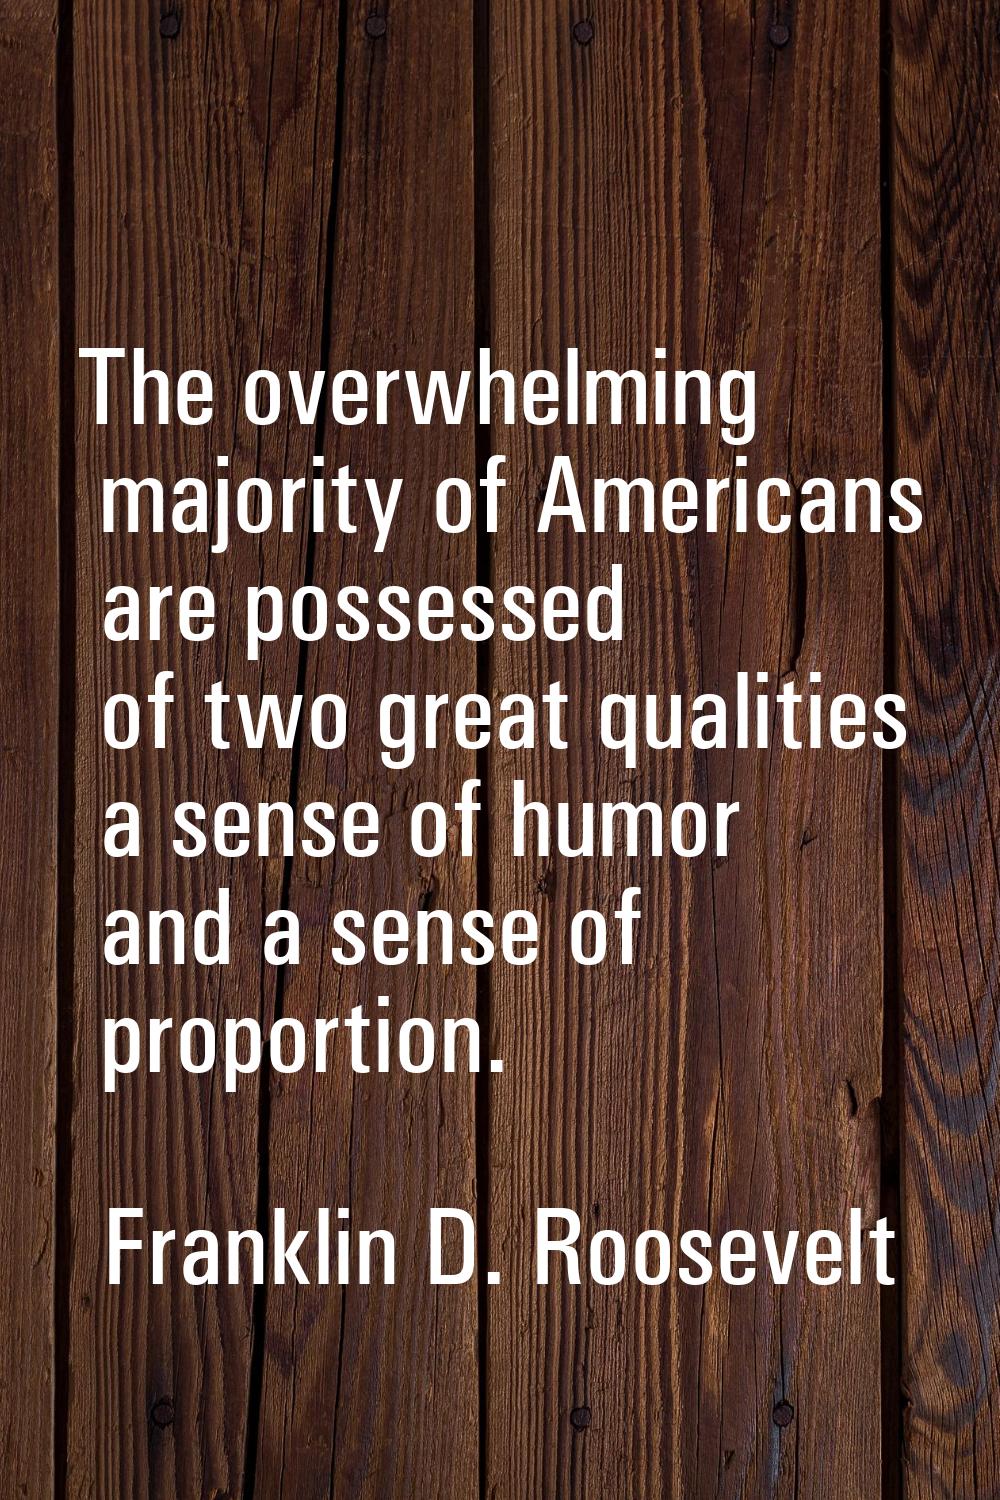 The overwhelming majority of Americans are possessed of two great qualities a sense of humor and a 